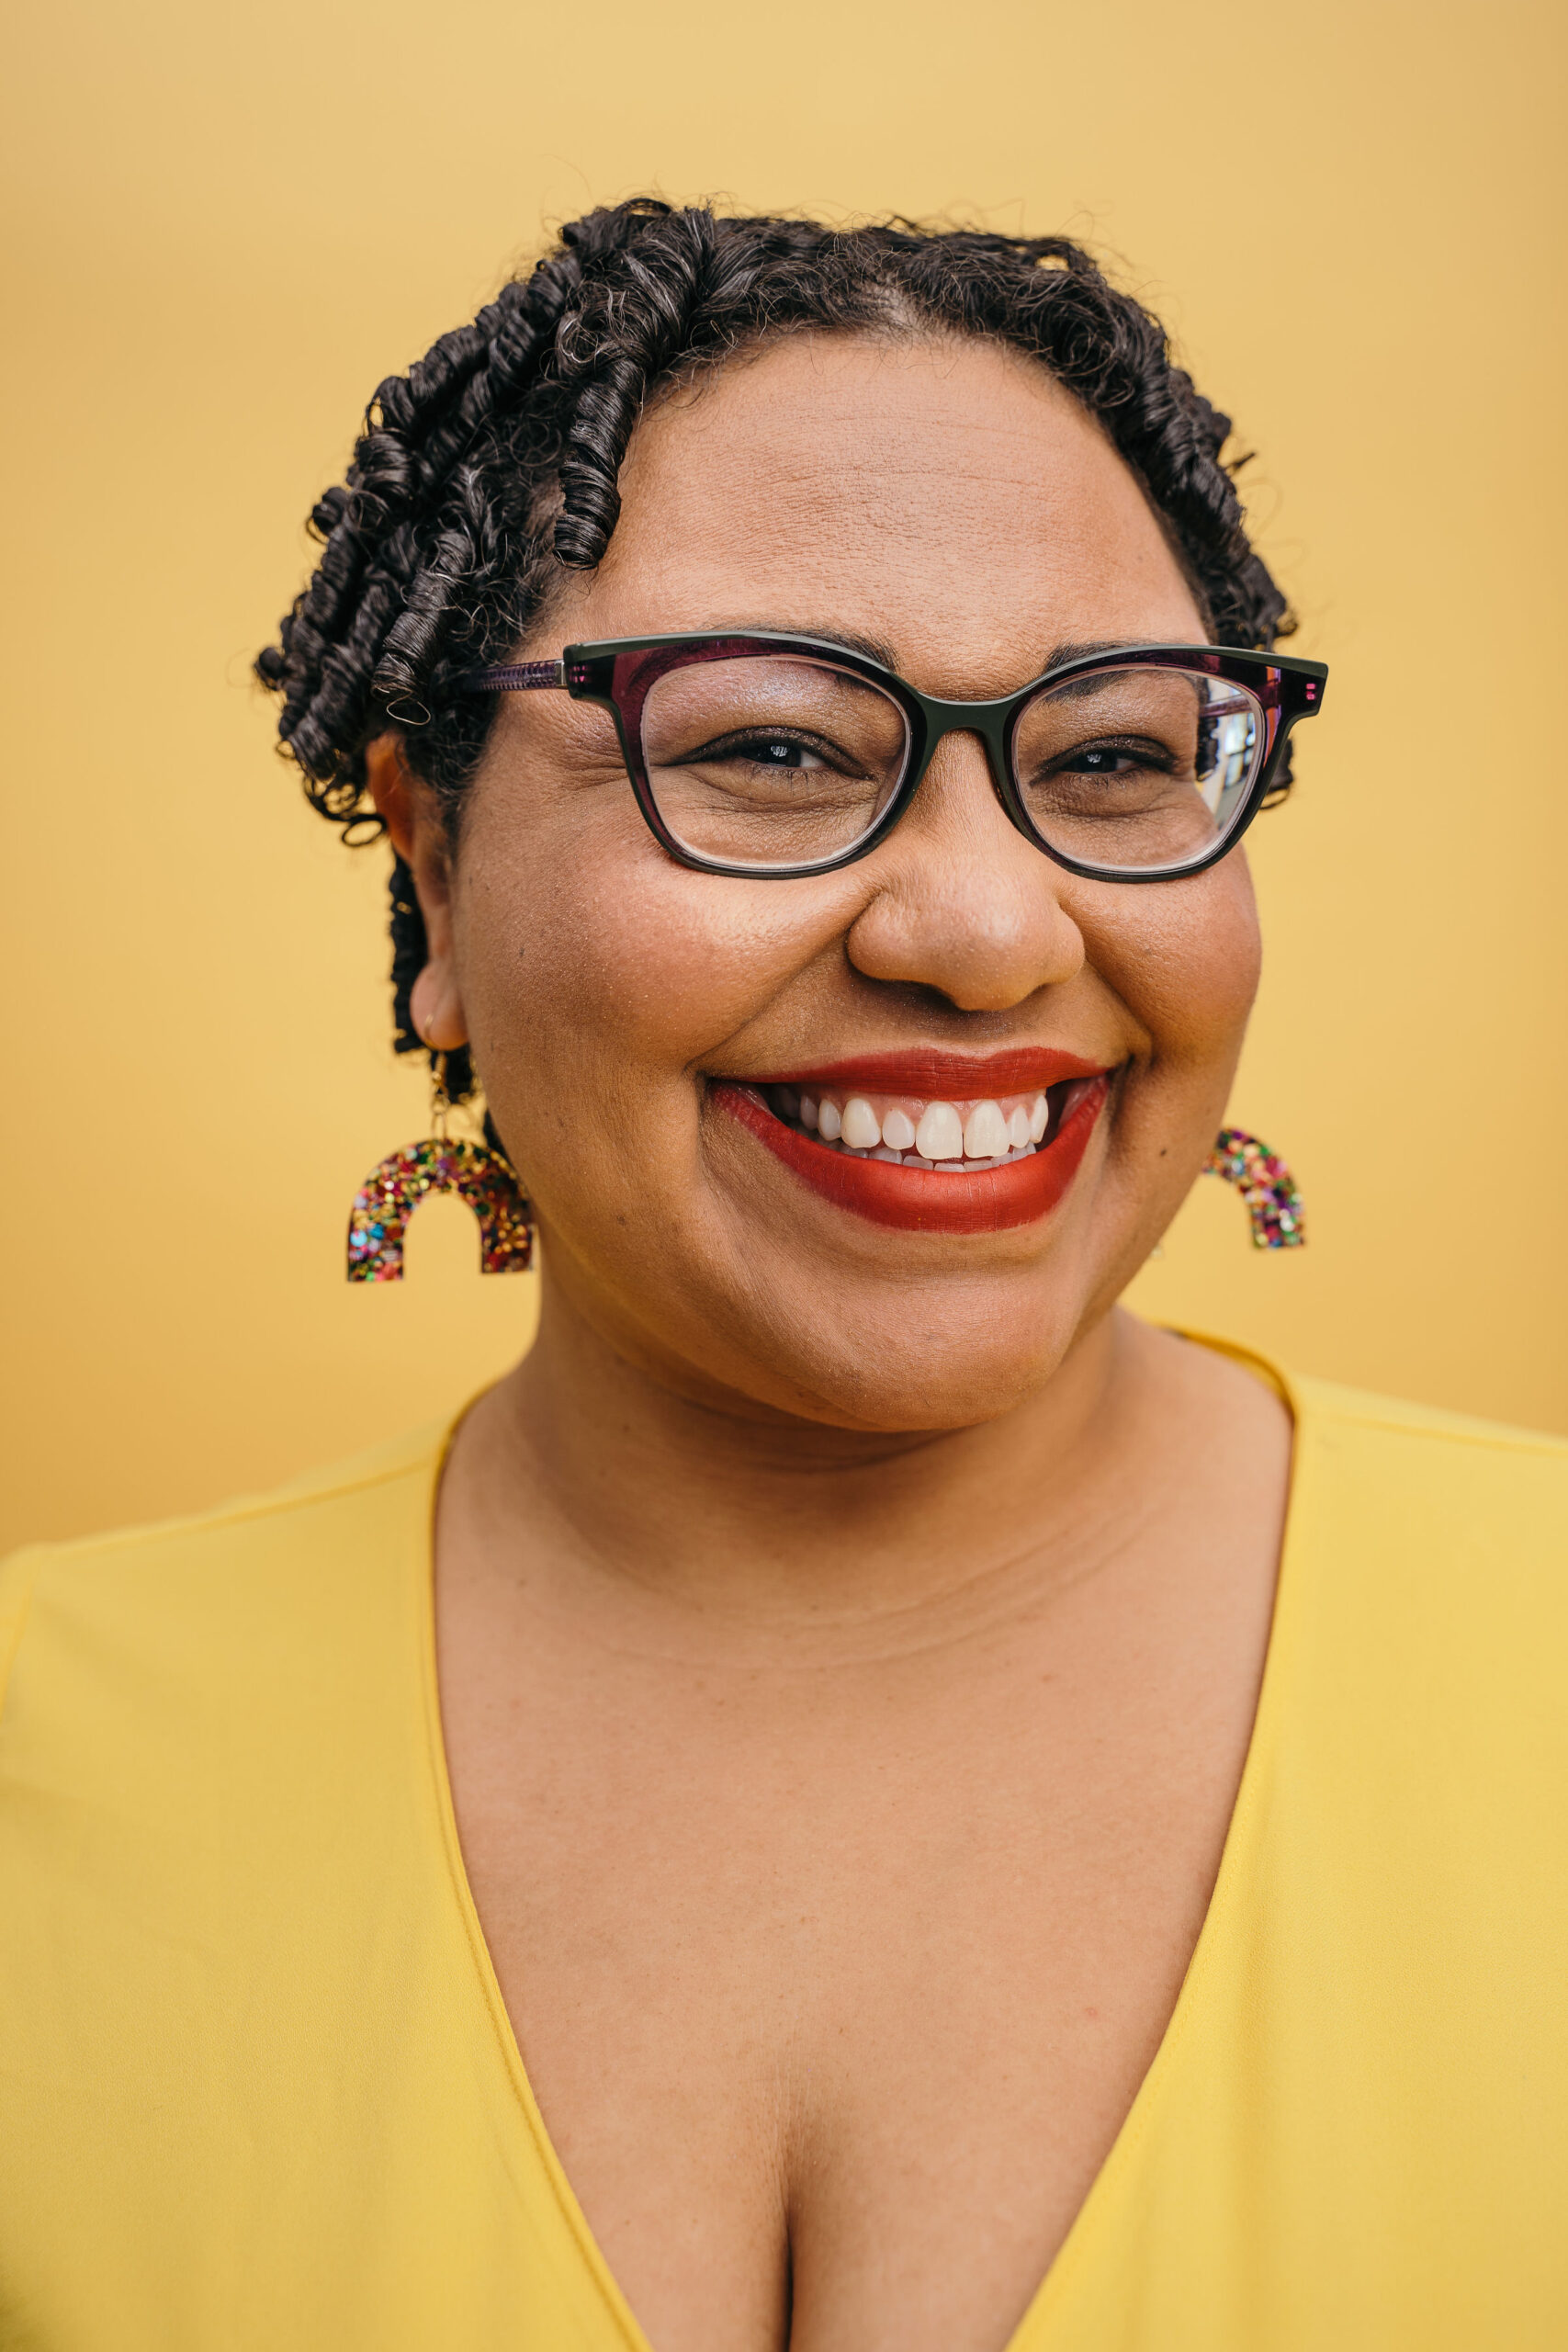 A Black women with short curly hair is smiling at the camera. She is wearing glasses with black frames and red liptstick.